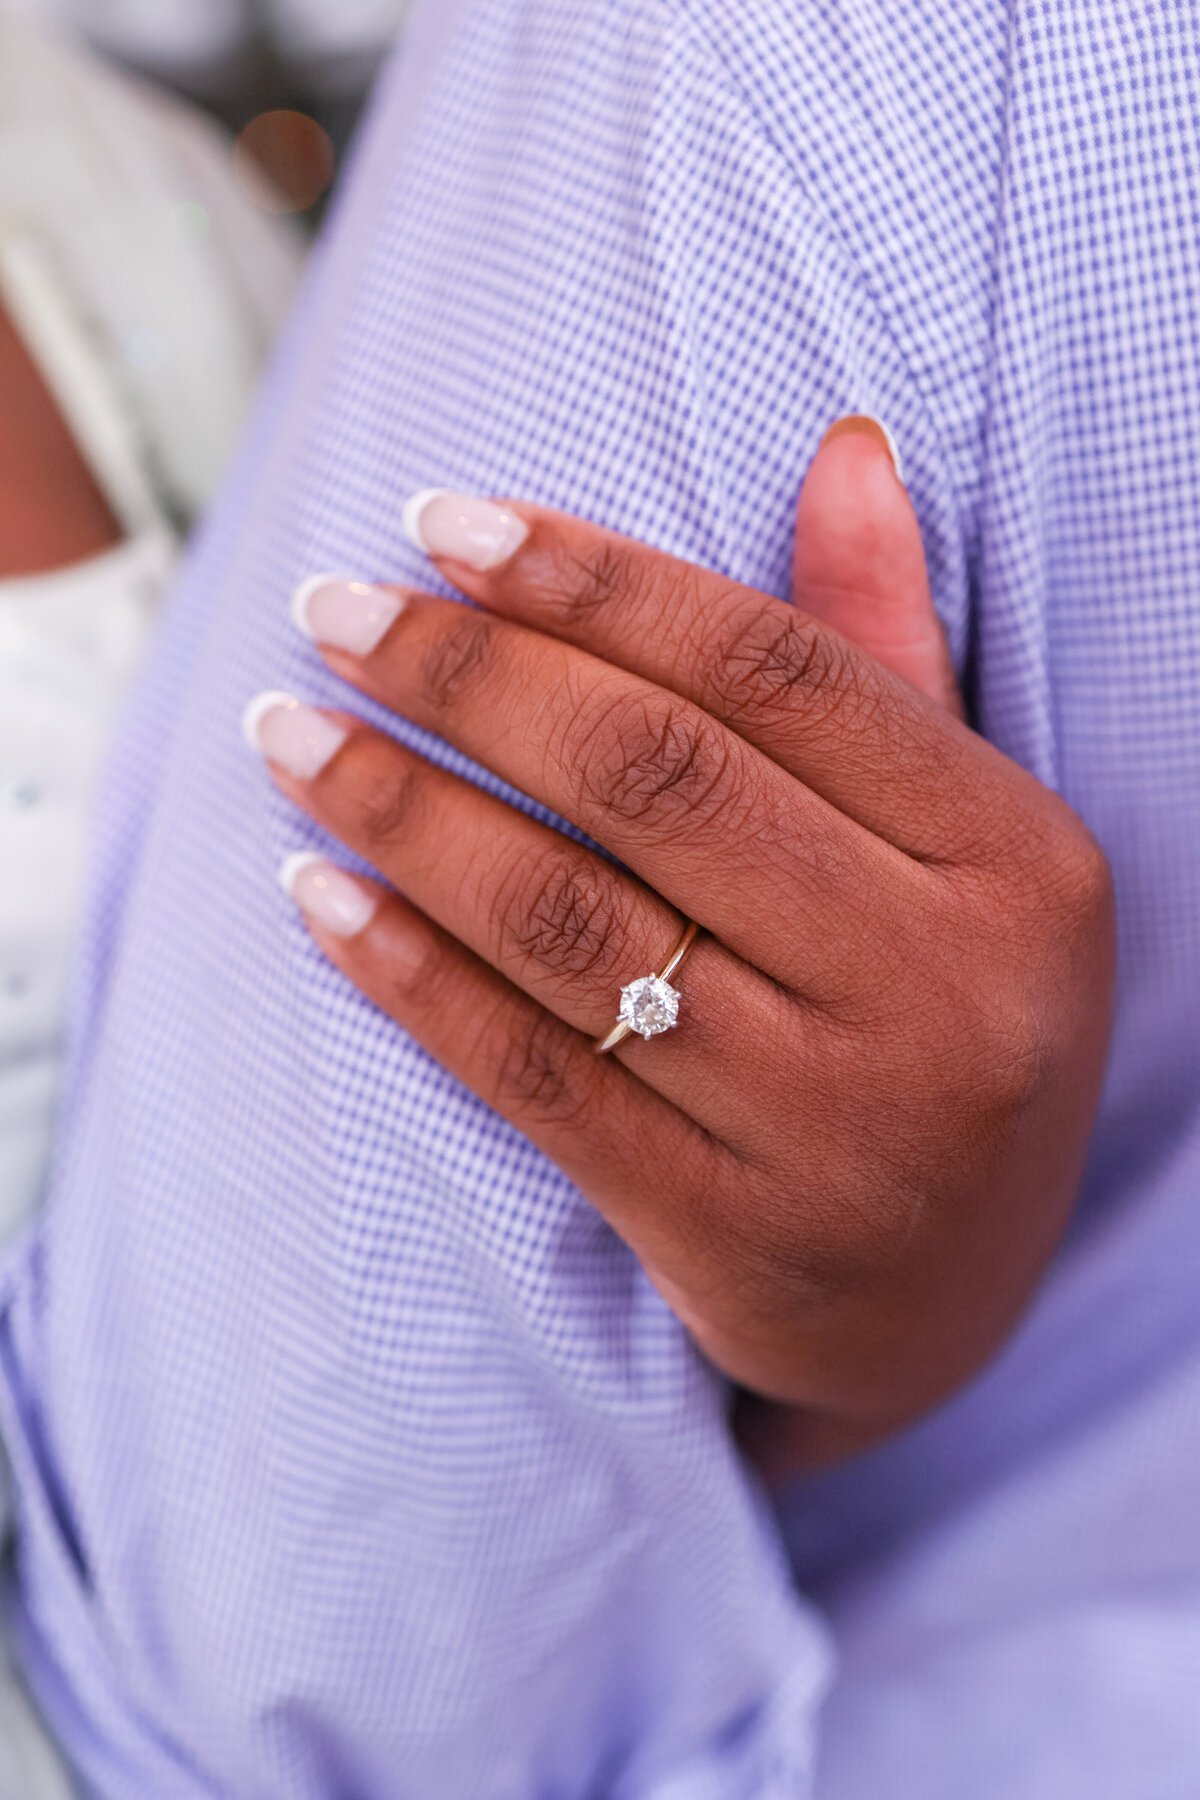 solitarie diamond engagement ring on womans hand while holding finacee's arm